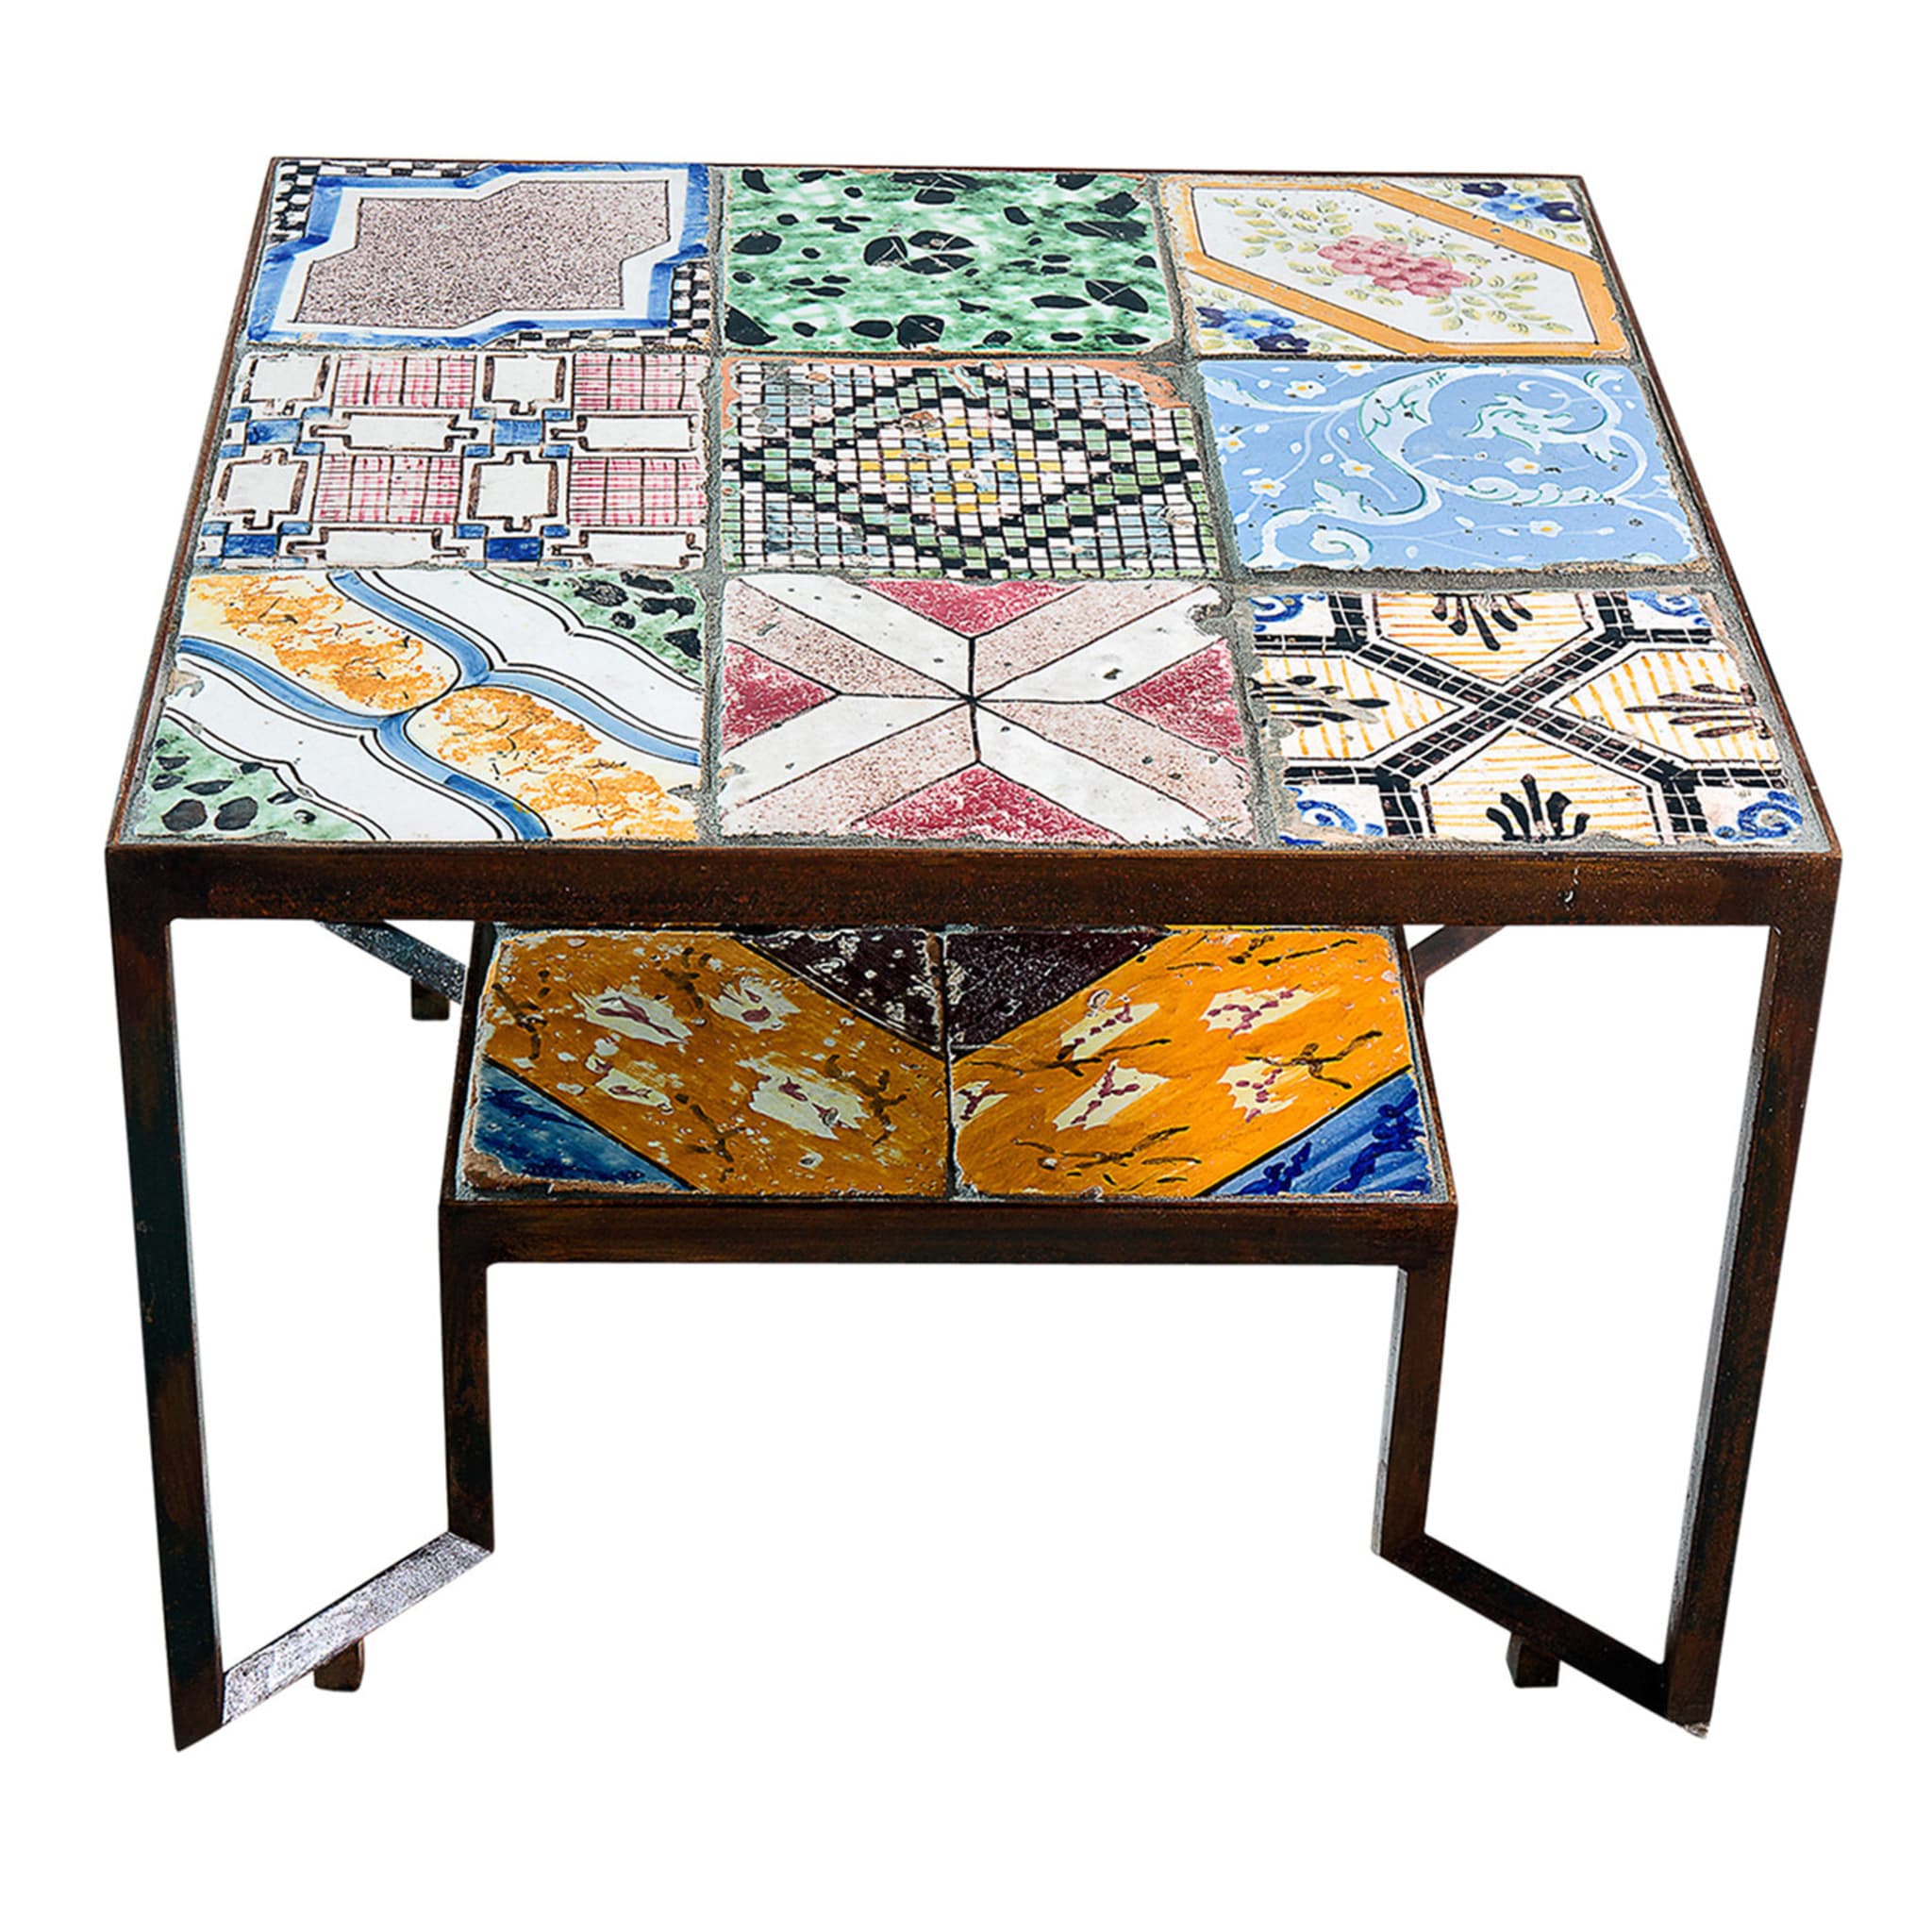 Anticato Tiles Spider Table - Main view